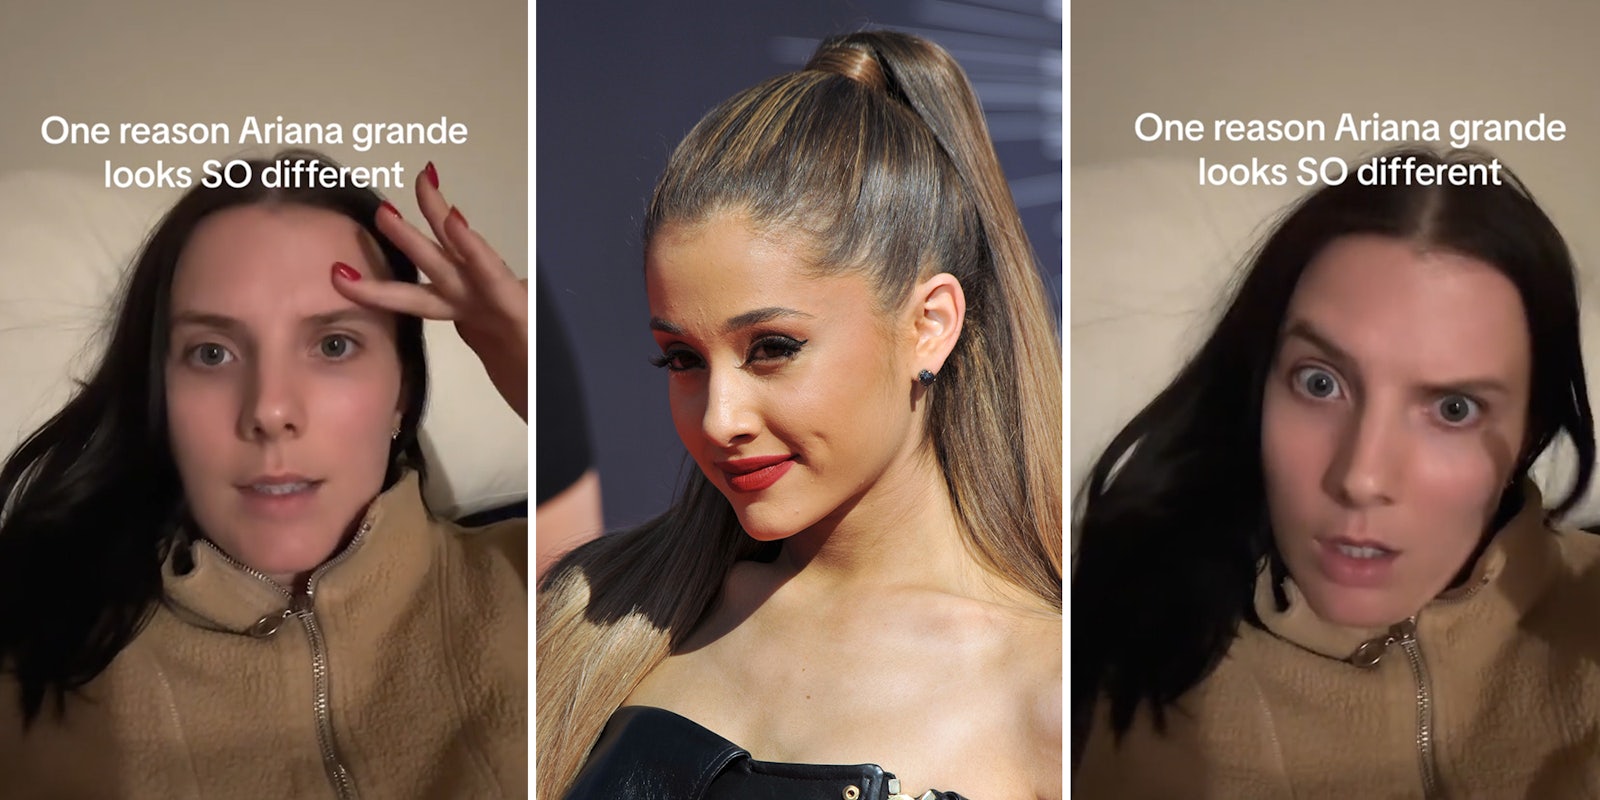 Beauty expert explains why everyone thinks Ariana Grande looks so different suddenly